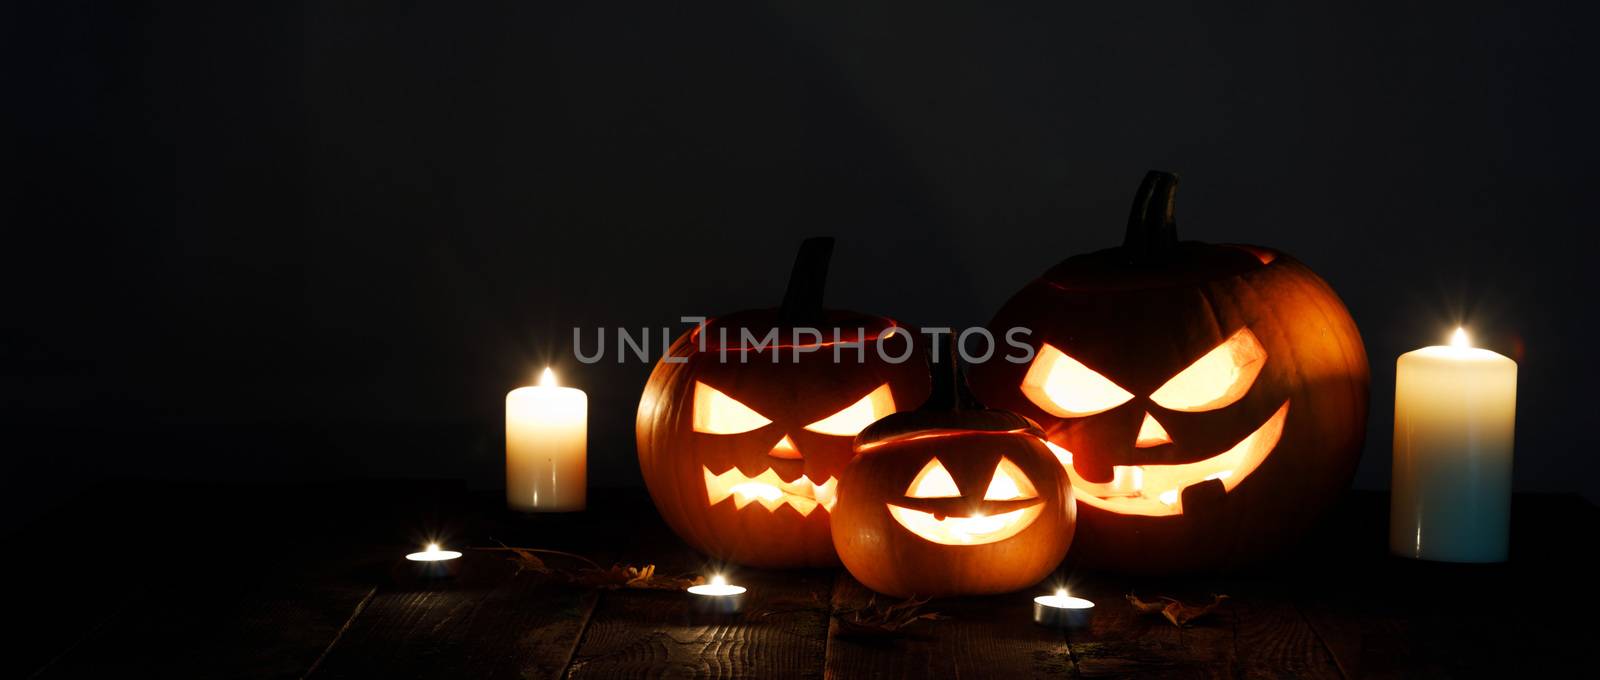 Halloween pumpkins and candles by Yellowj